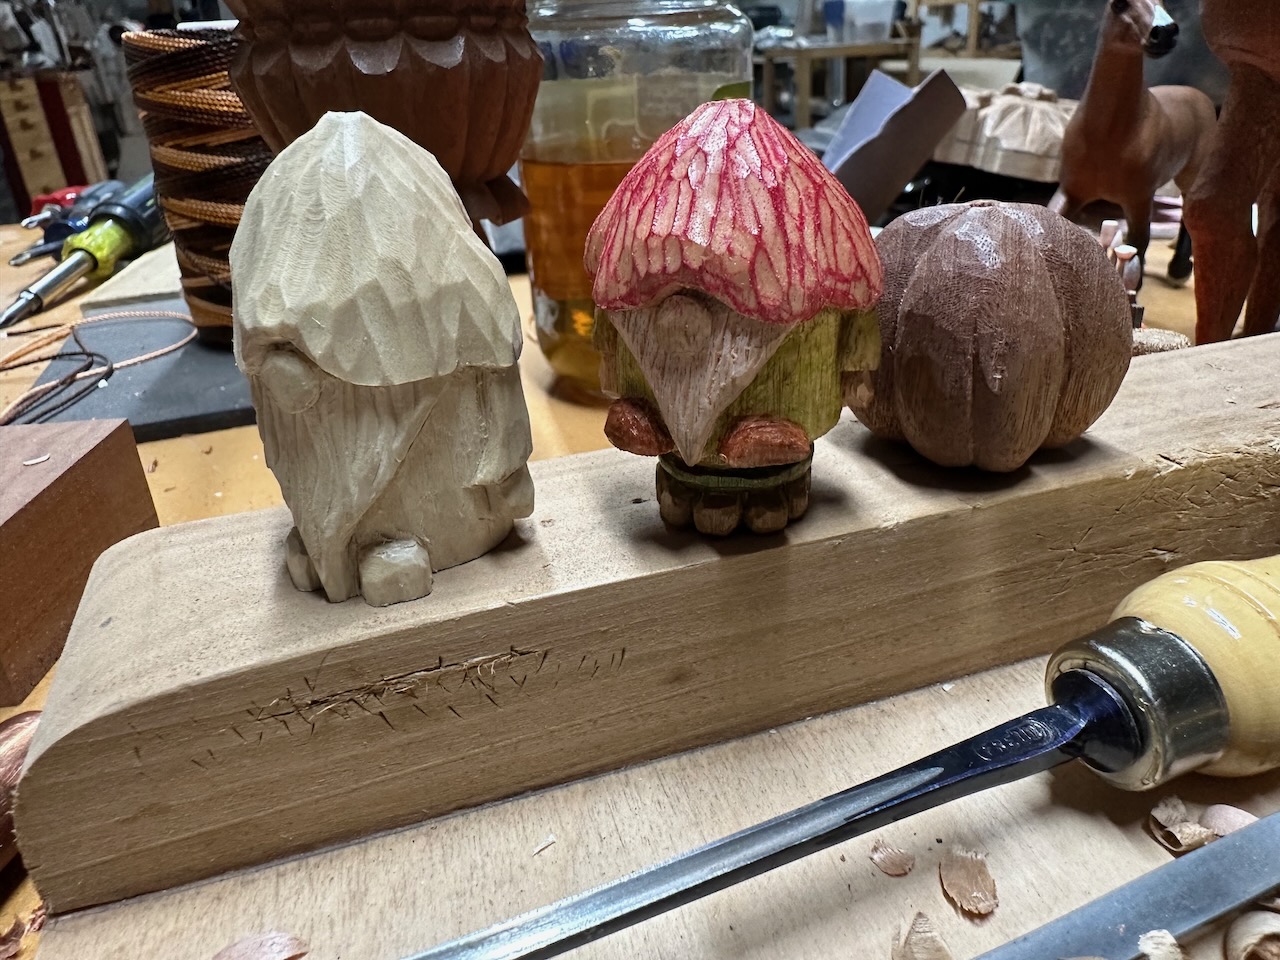 Four hand carved beads on the workbench. Photo by author.